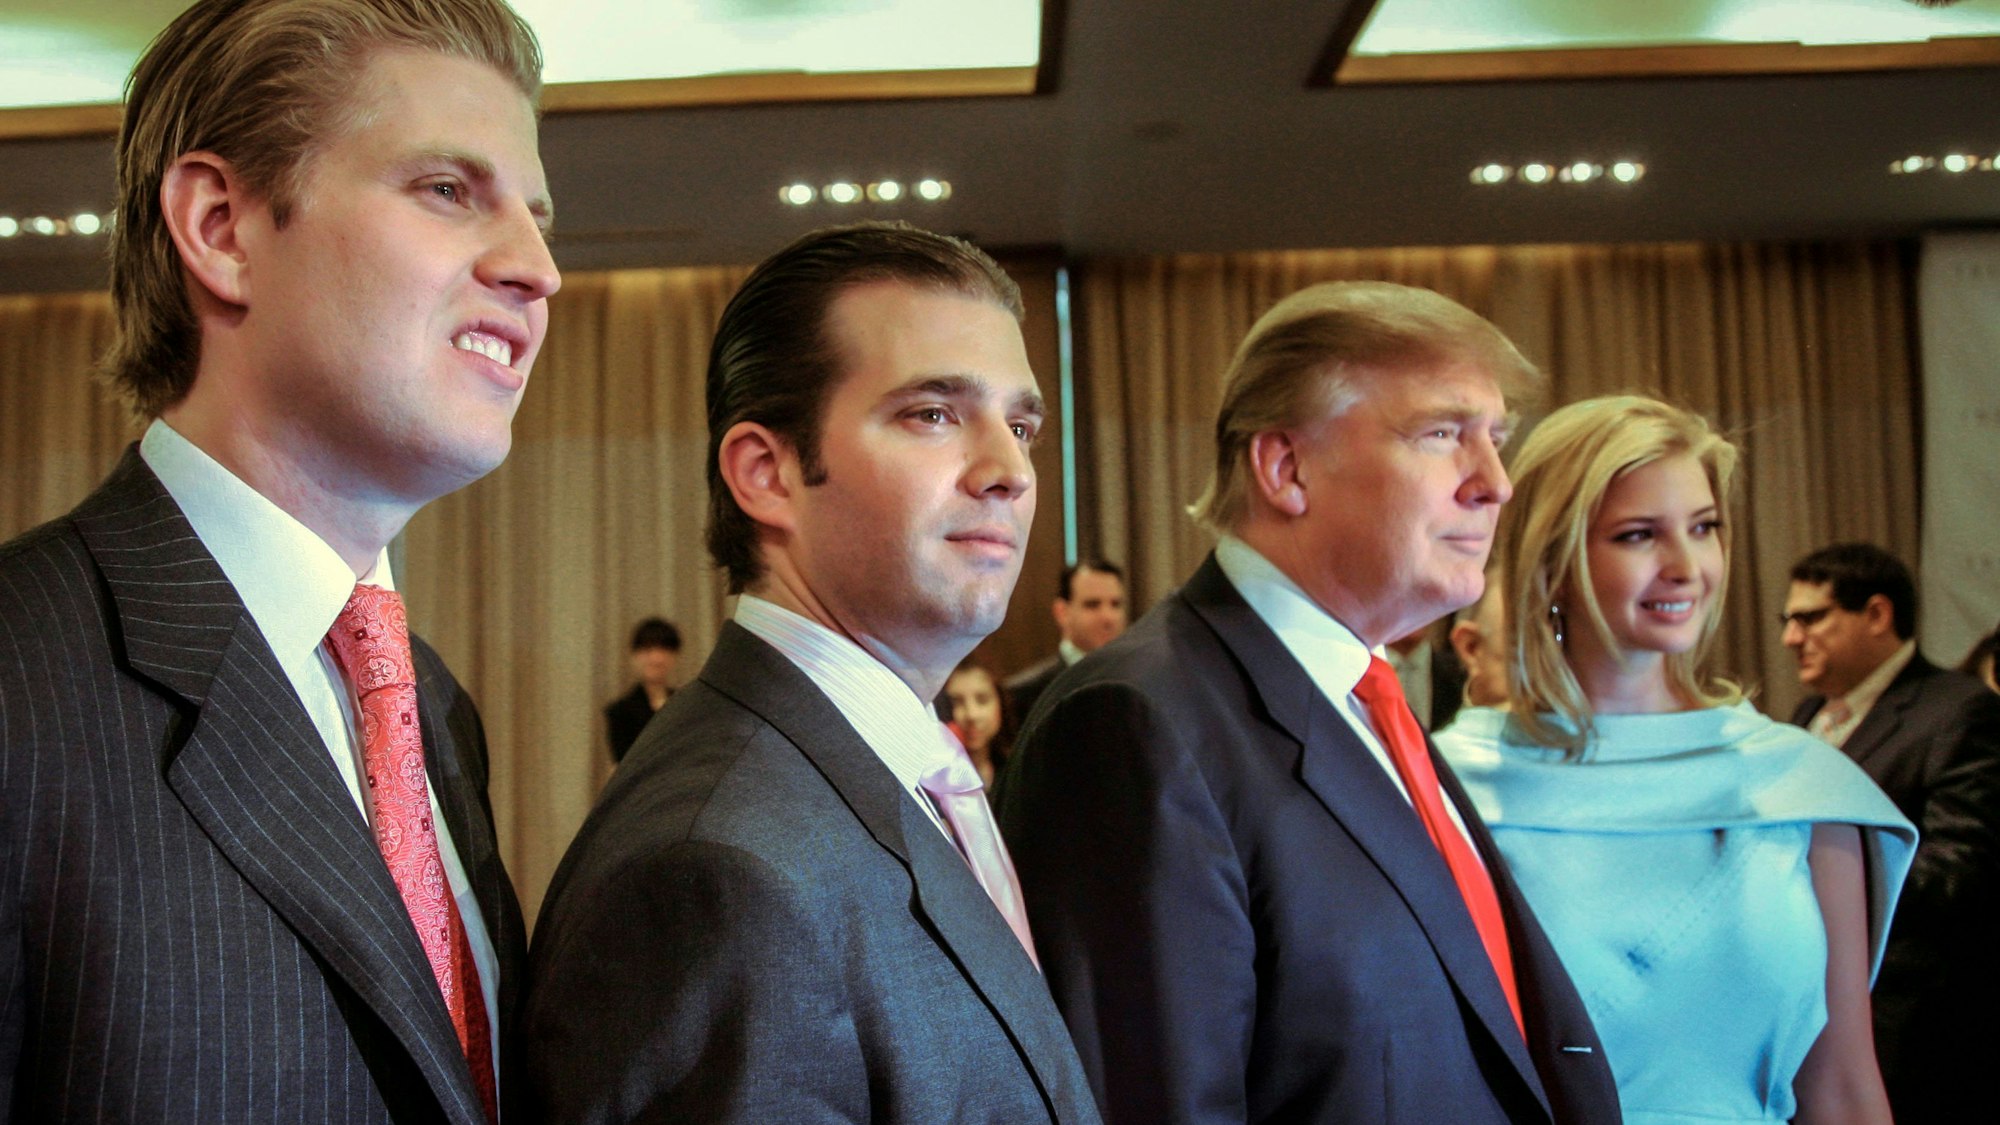 FILE - Donald Trump, chairman and CEO of the Trump Organization, poses with his children, from left, Eric, Donald Jr. and Ivanka, at the opening of the Trump SoHo New York on April 9, 2010. Donald Trump's company has been convicted of tax fraud on Tuesday, Dec. 6, 2022, for a scheme by top executives to avoid paying personal income taxes on perks such as apartments and luxury cars. As punishment, the Trump Organization could be fined up to $1.6 million. (AP Photo/Mark Lennihan, File)